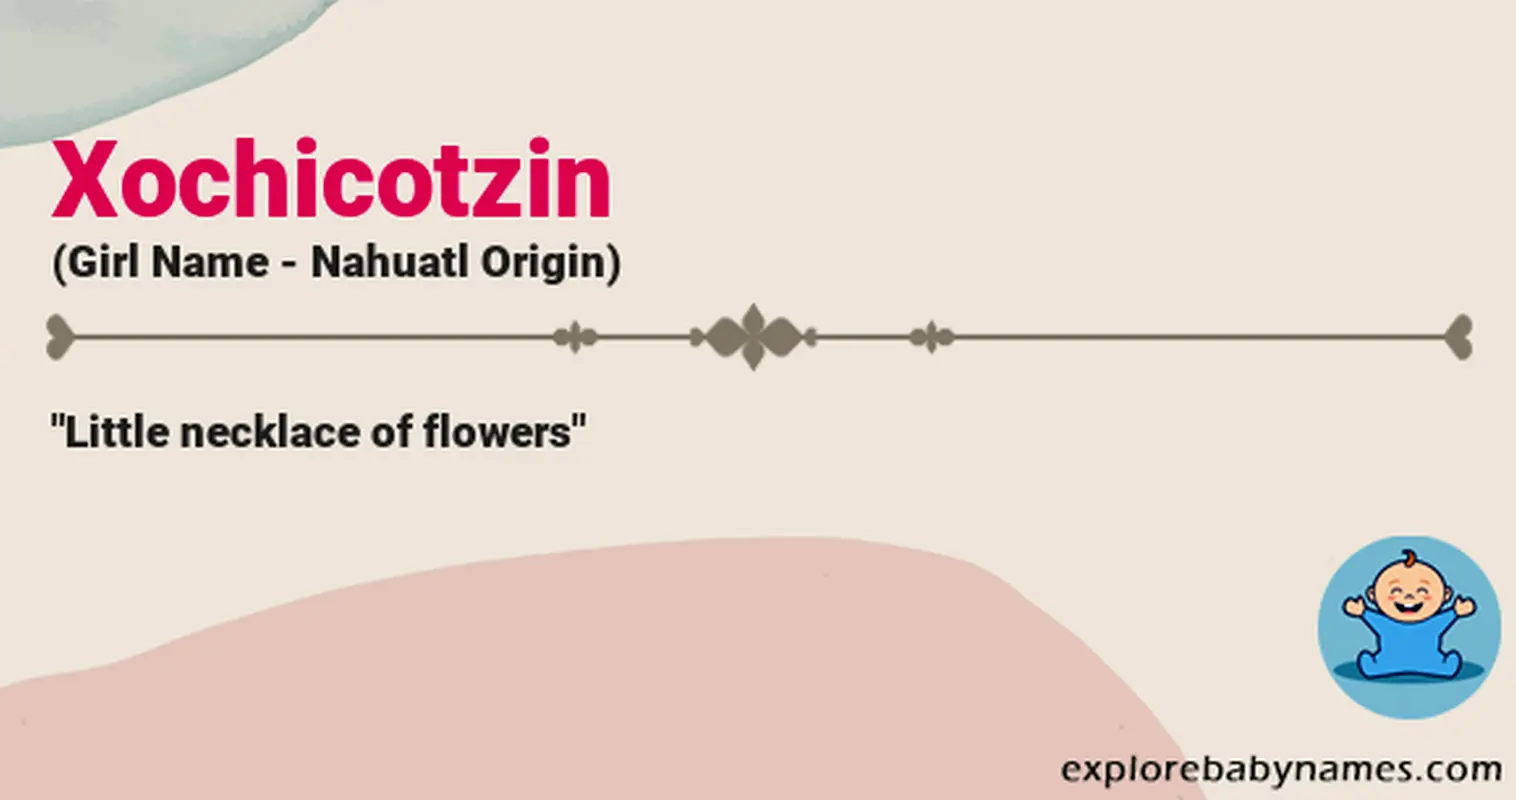 Meaning of Xochicotzin